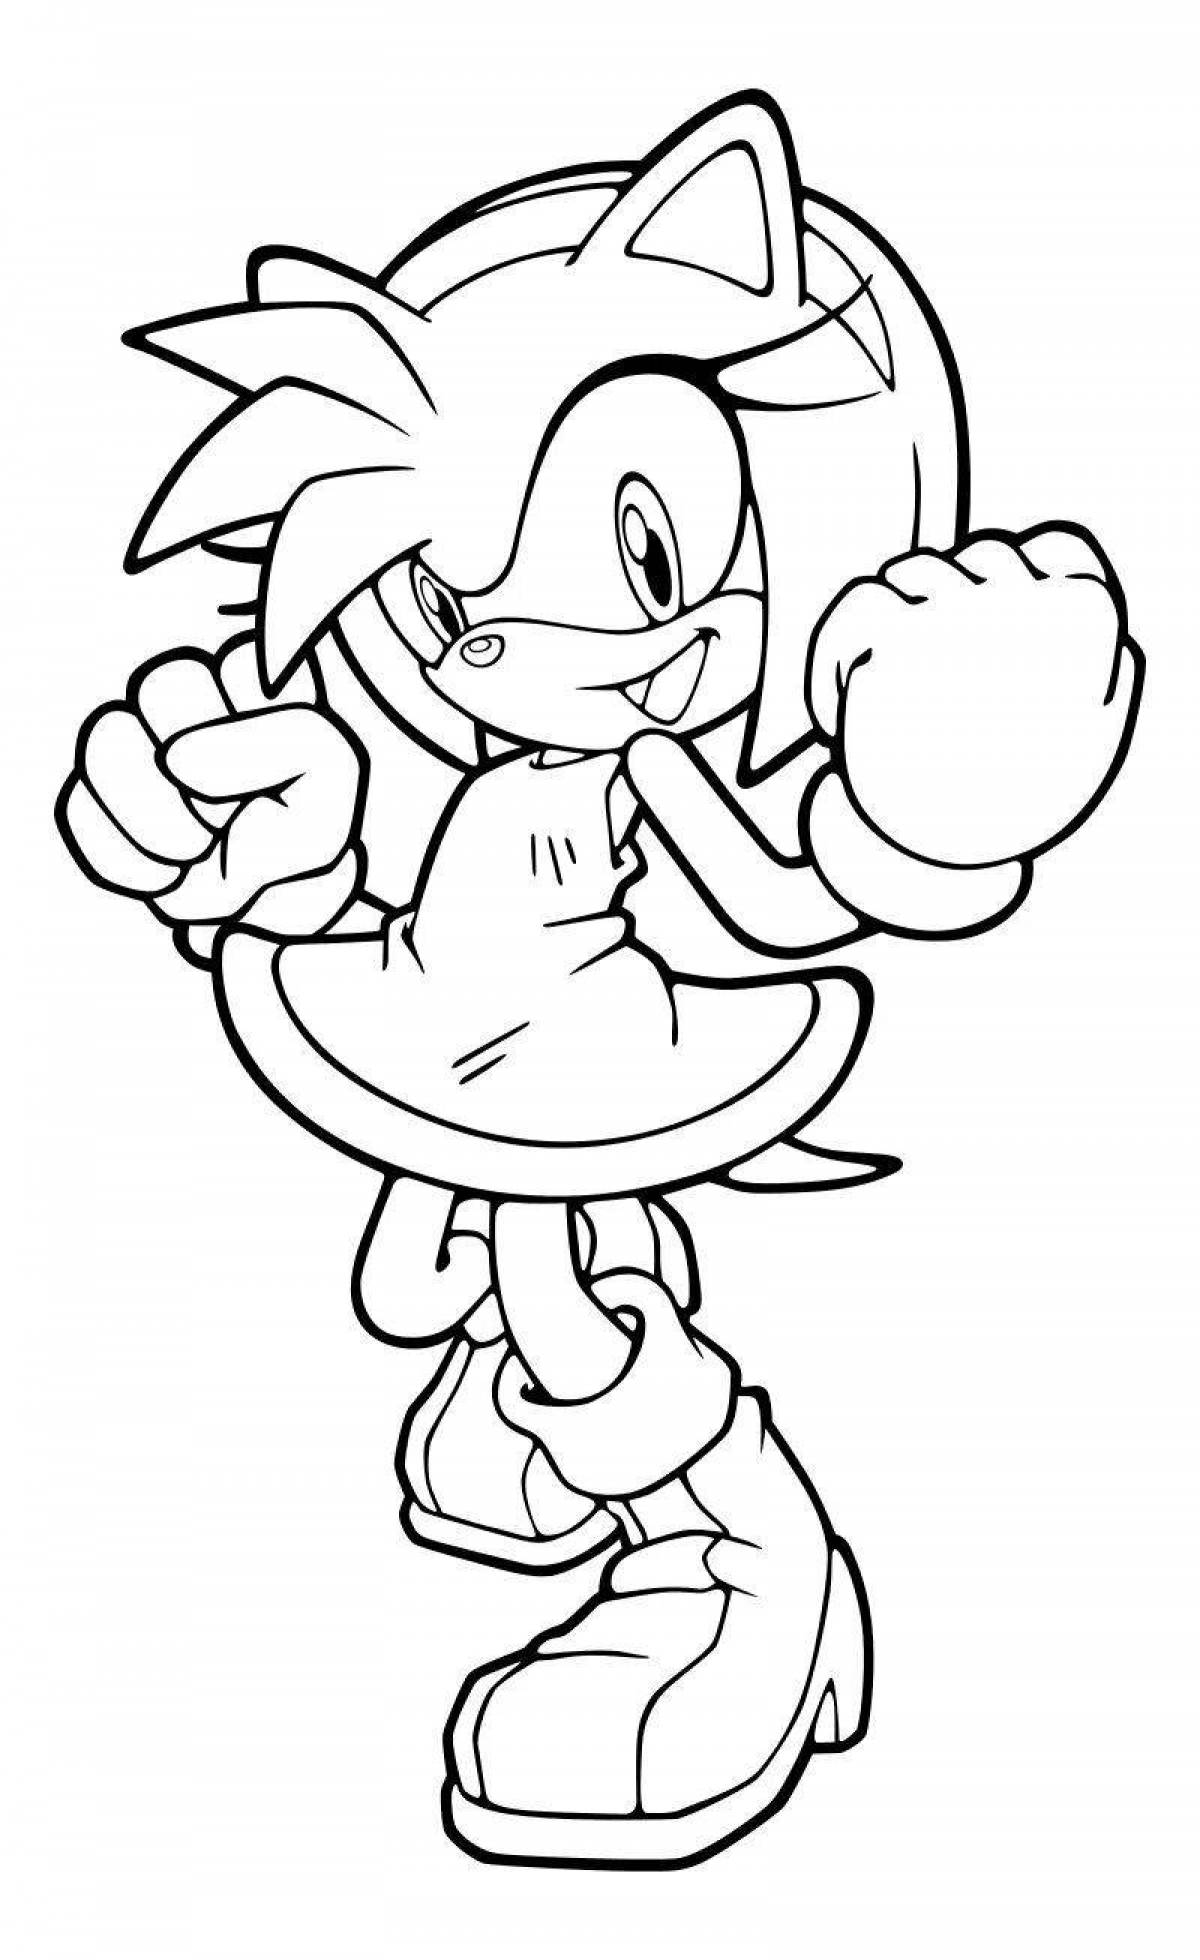 Exciting sonic the hedgehog coloring book